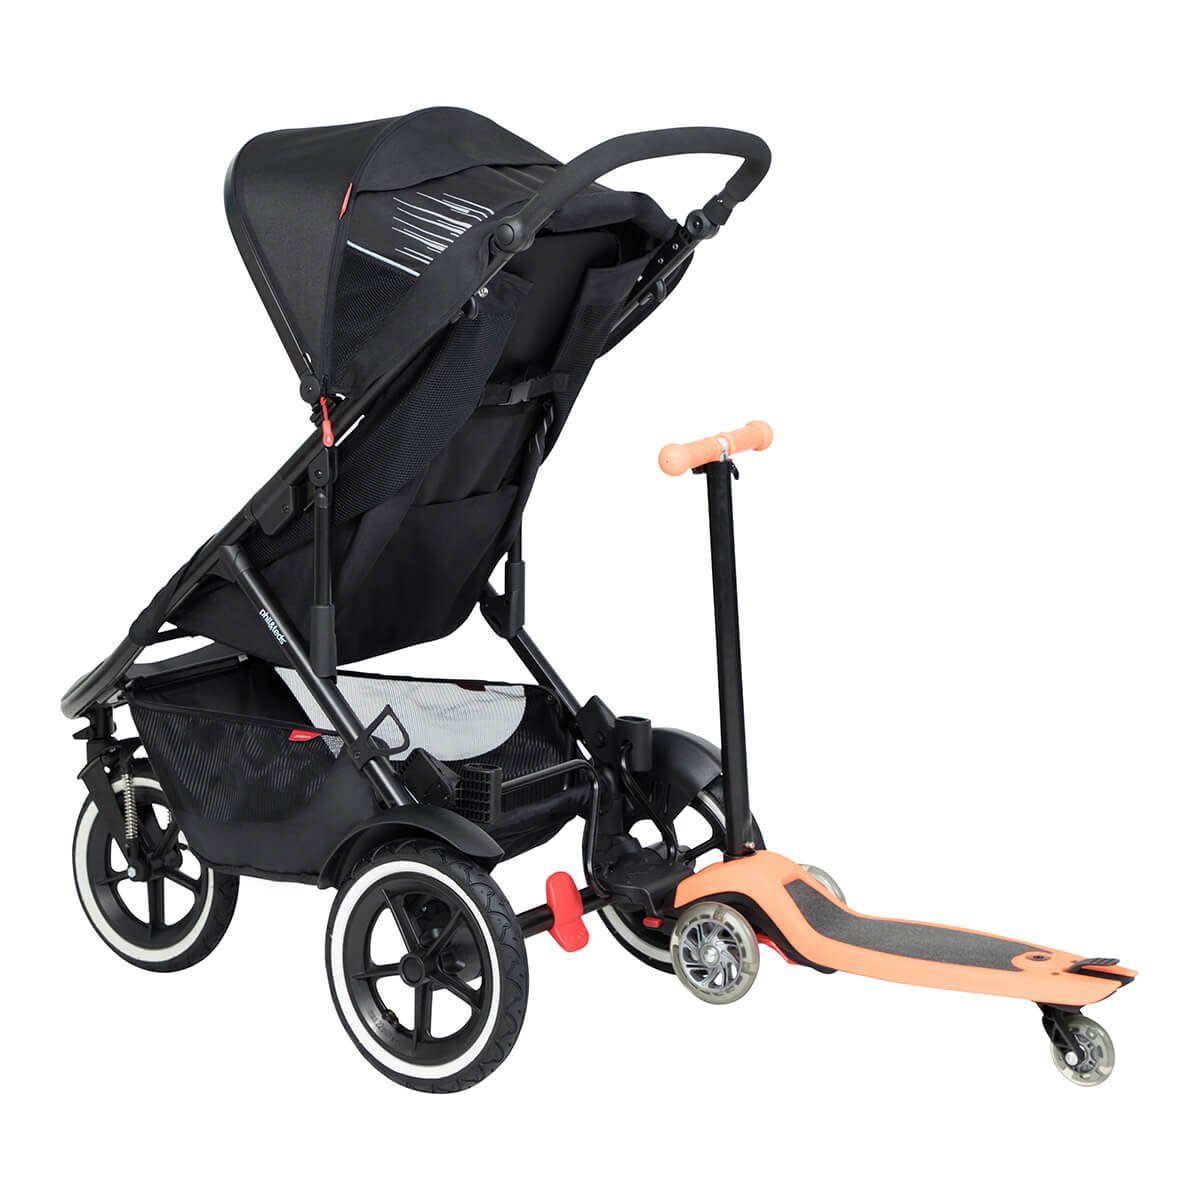 https://cdn.accentuate.io/7232374571192/19440099852472/philteds-sport-buggy-with-freerider-stroller-board-in-rear-v1667535090857.jpg?1200x1200